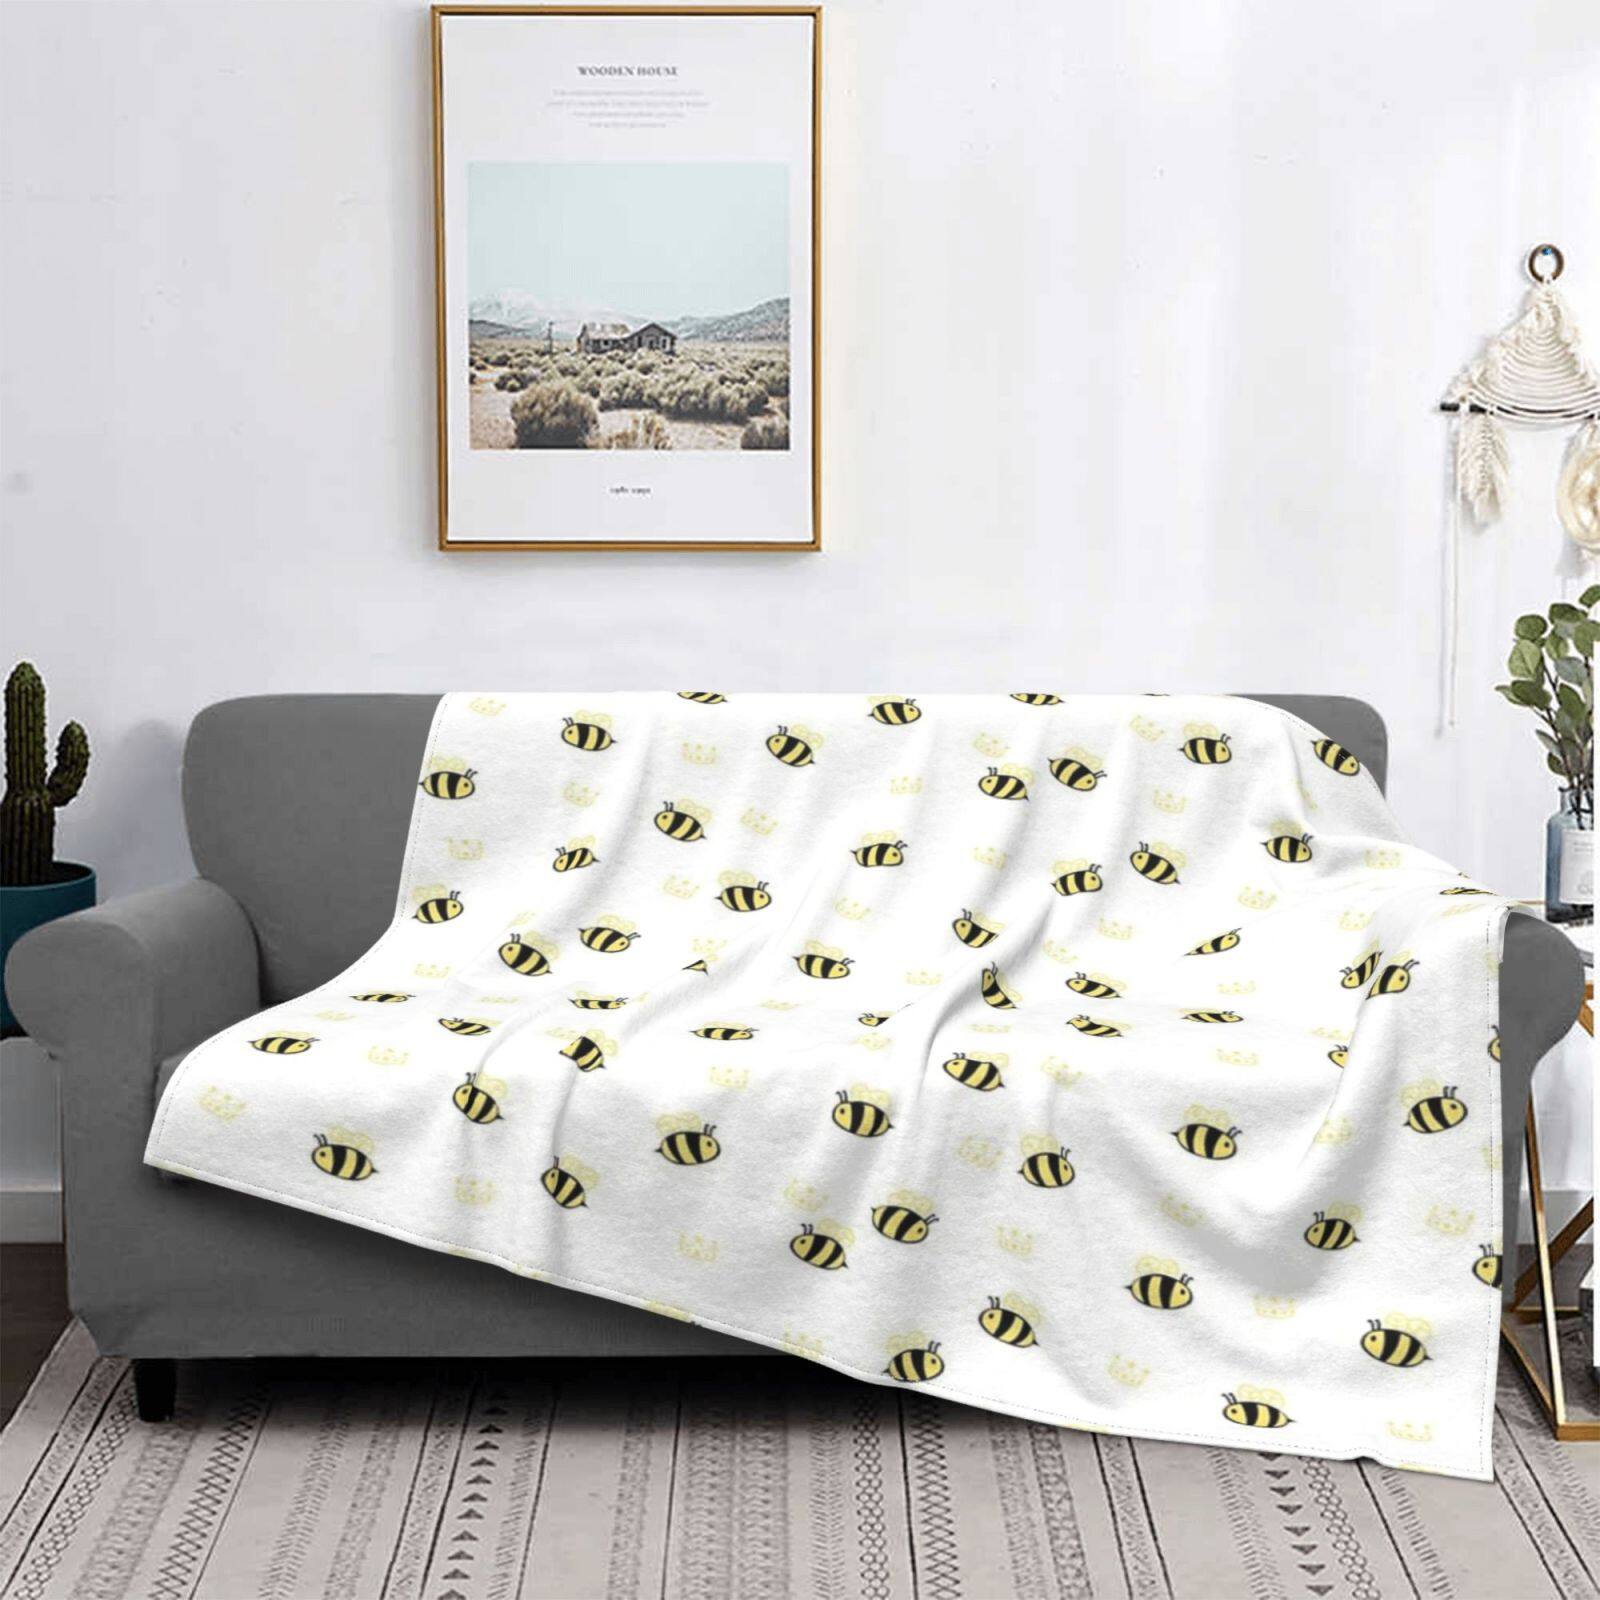 Vandarllin Yellow Sunflowers and Bees Super Soft Throw Blankets Art Prints Fluffy Fuzzy Flannel Bed Blanket Decorative for Home Sofa Couch Chair Living Bedroom,40X50 in